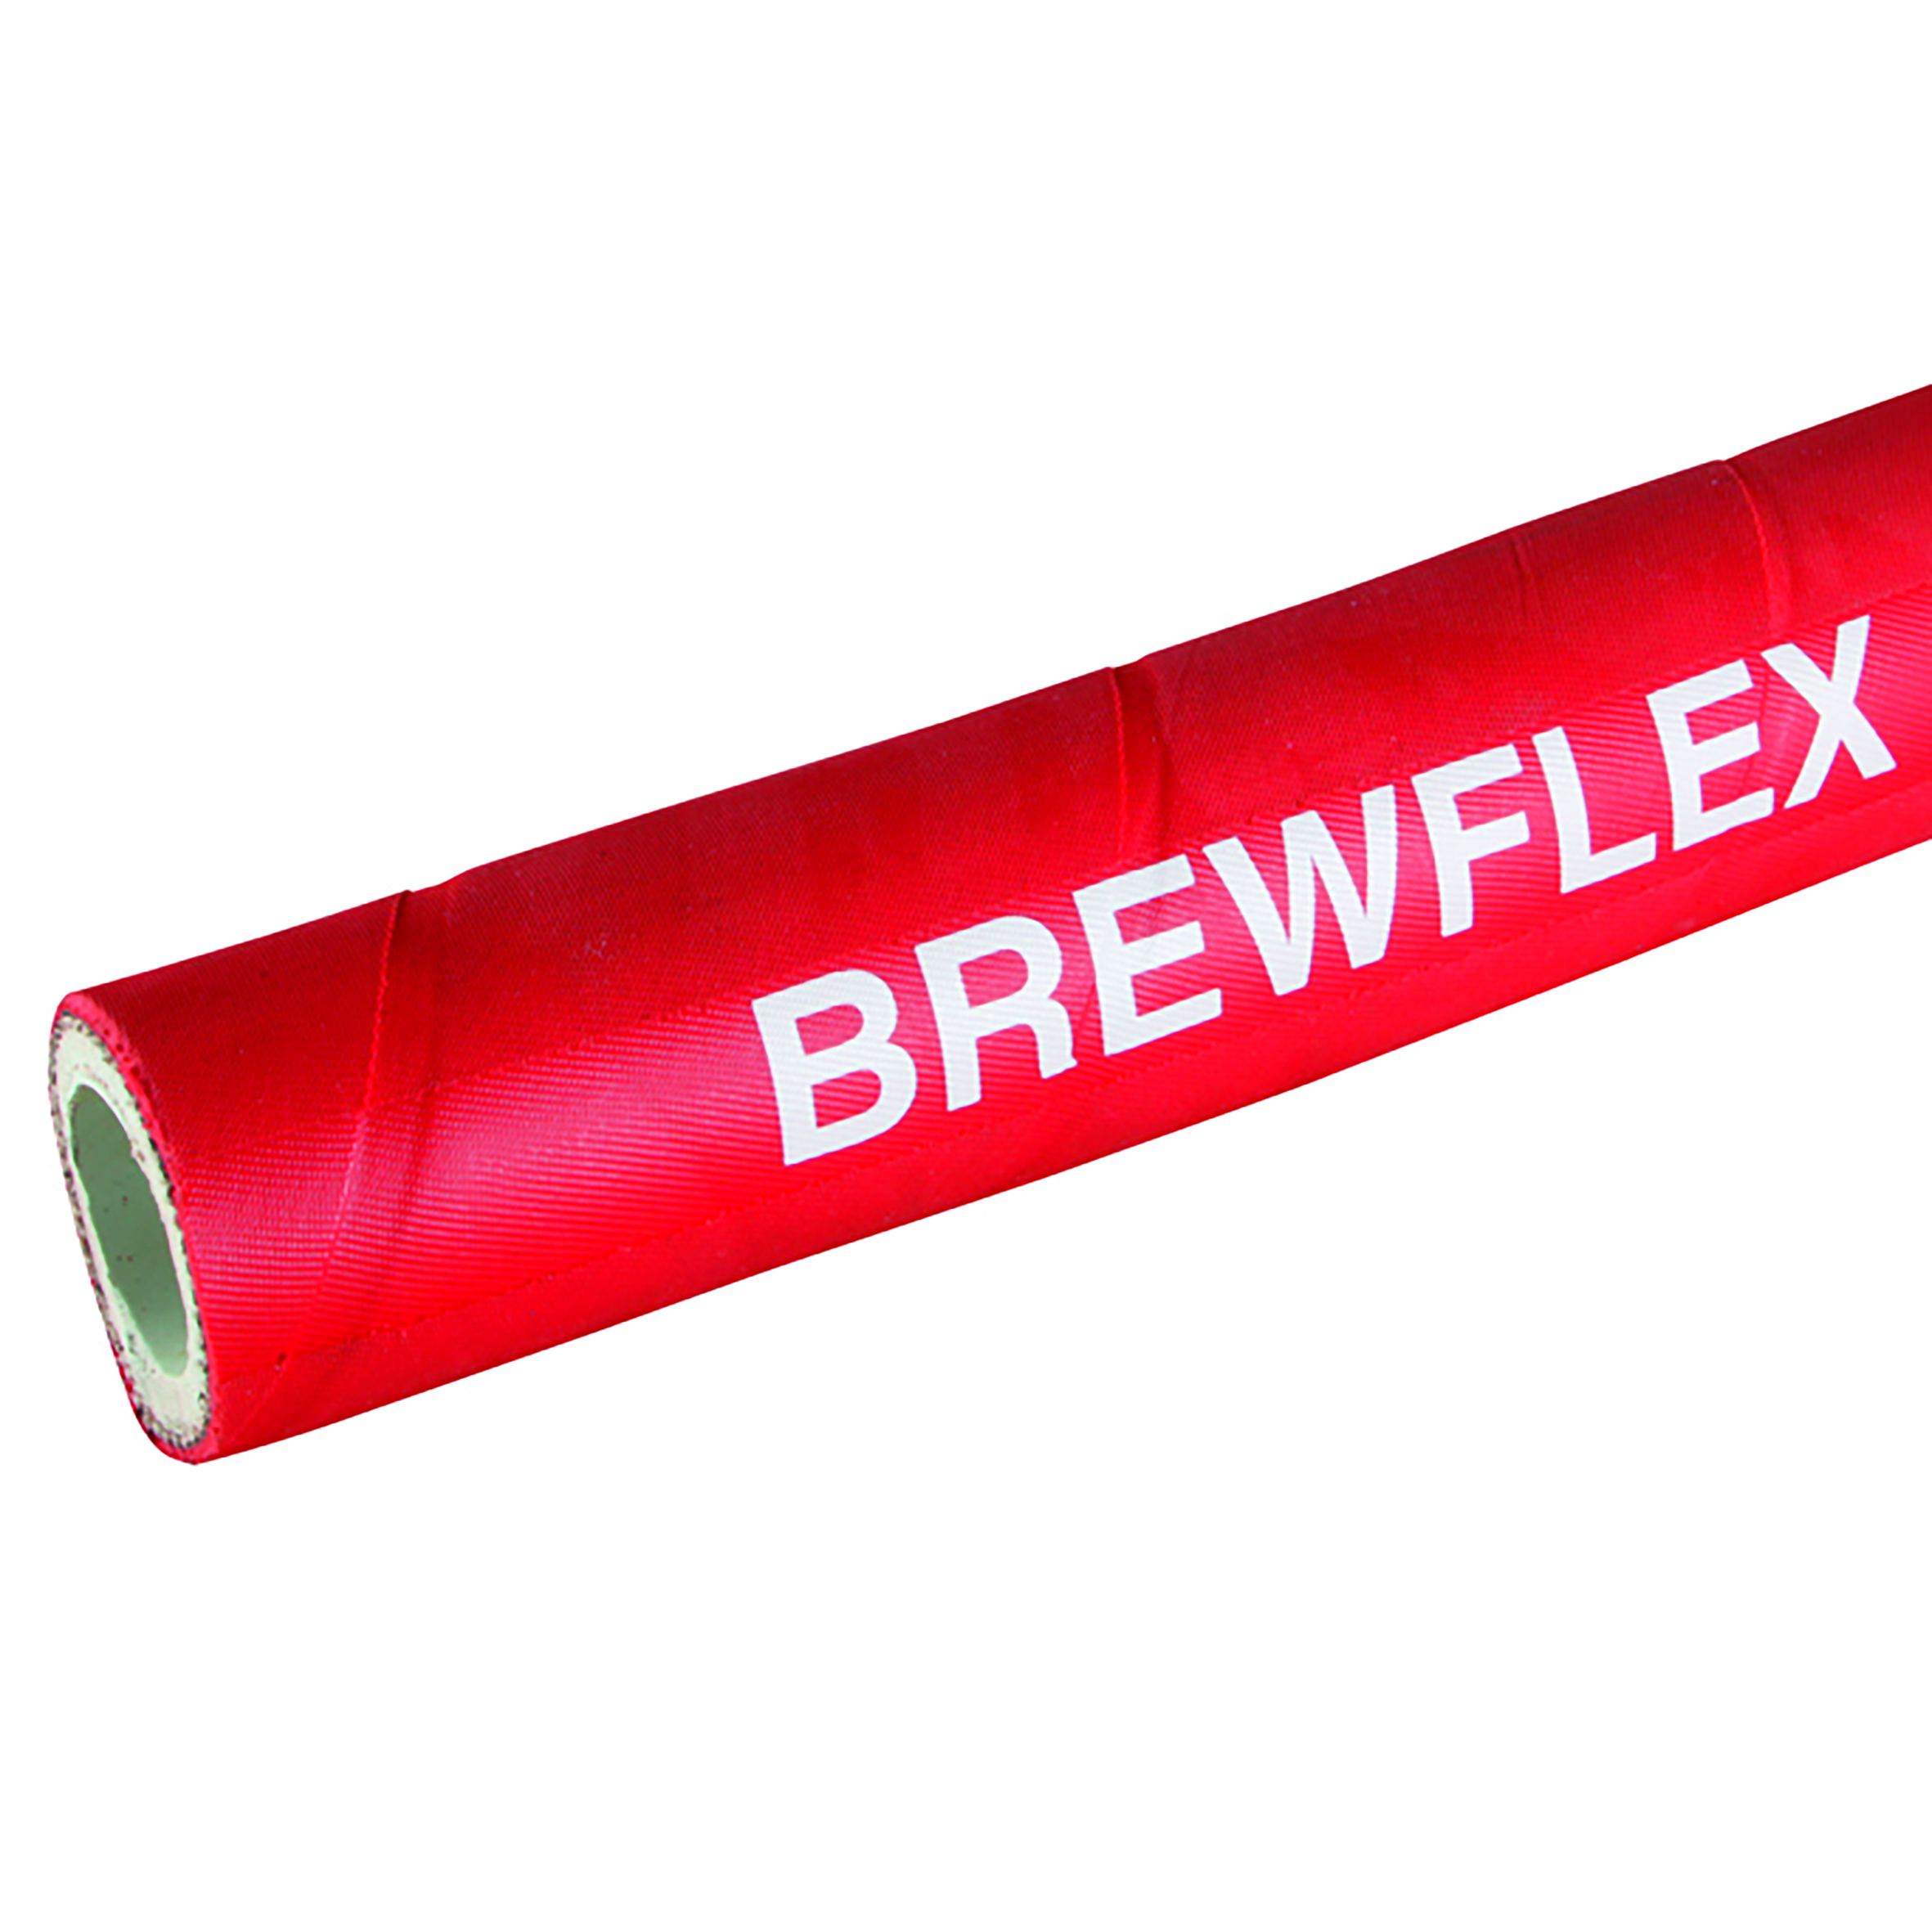 1.1/4" ID BREWERS DELIVERY HOSE 10M